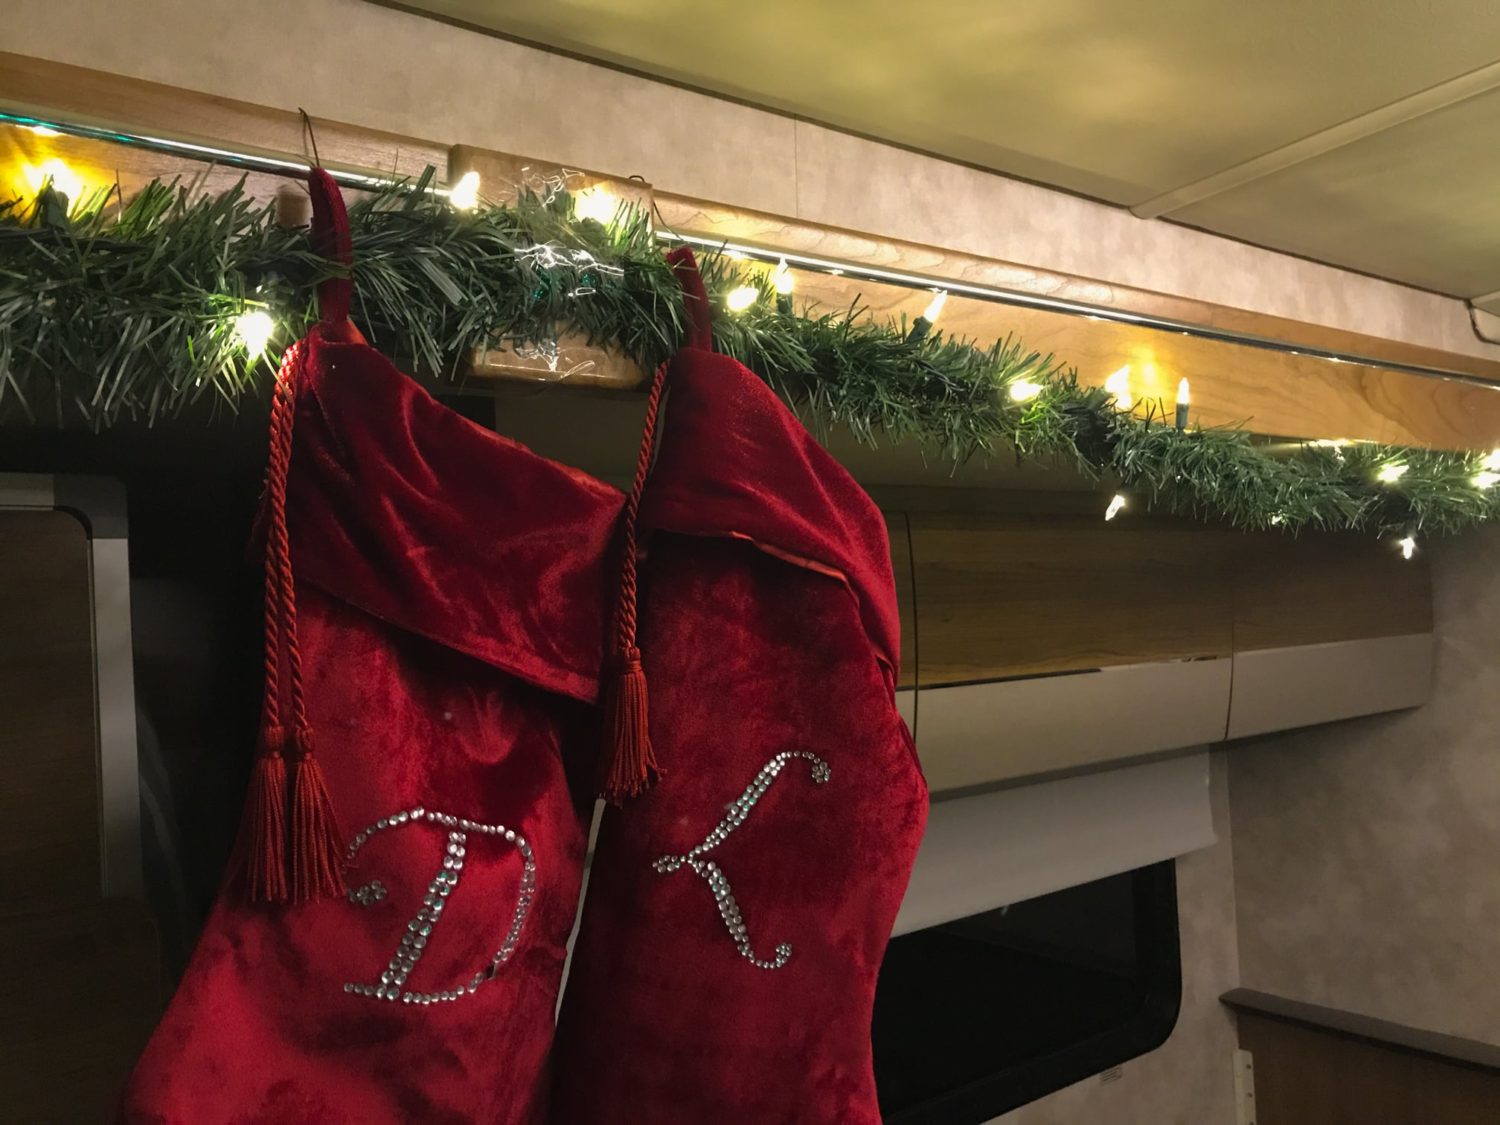 Decorating an RV for Christmas